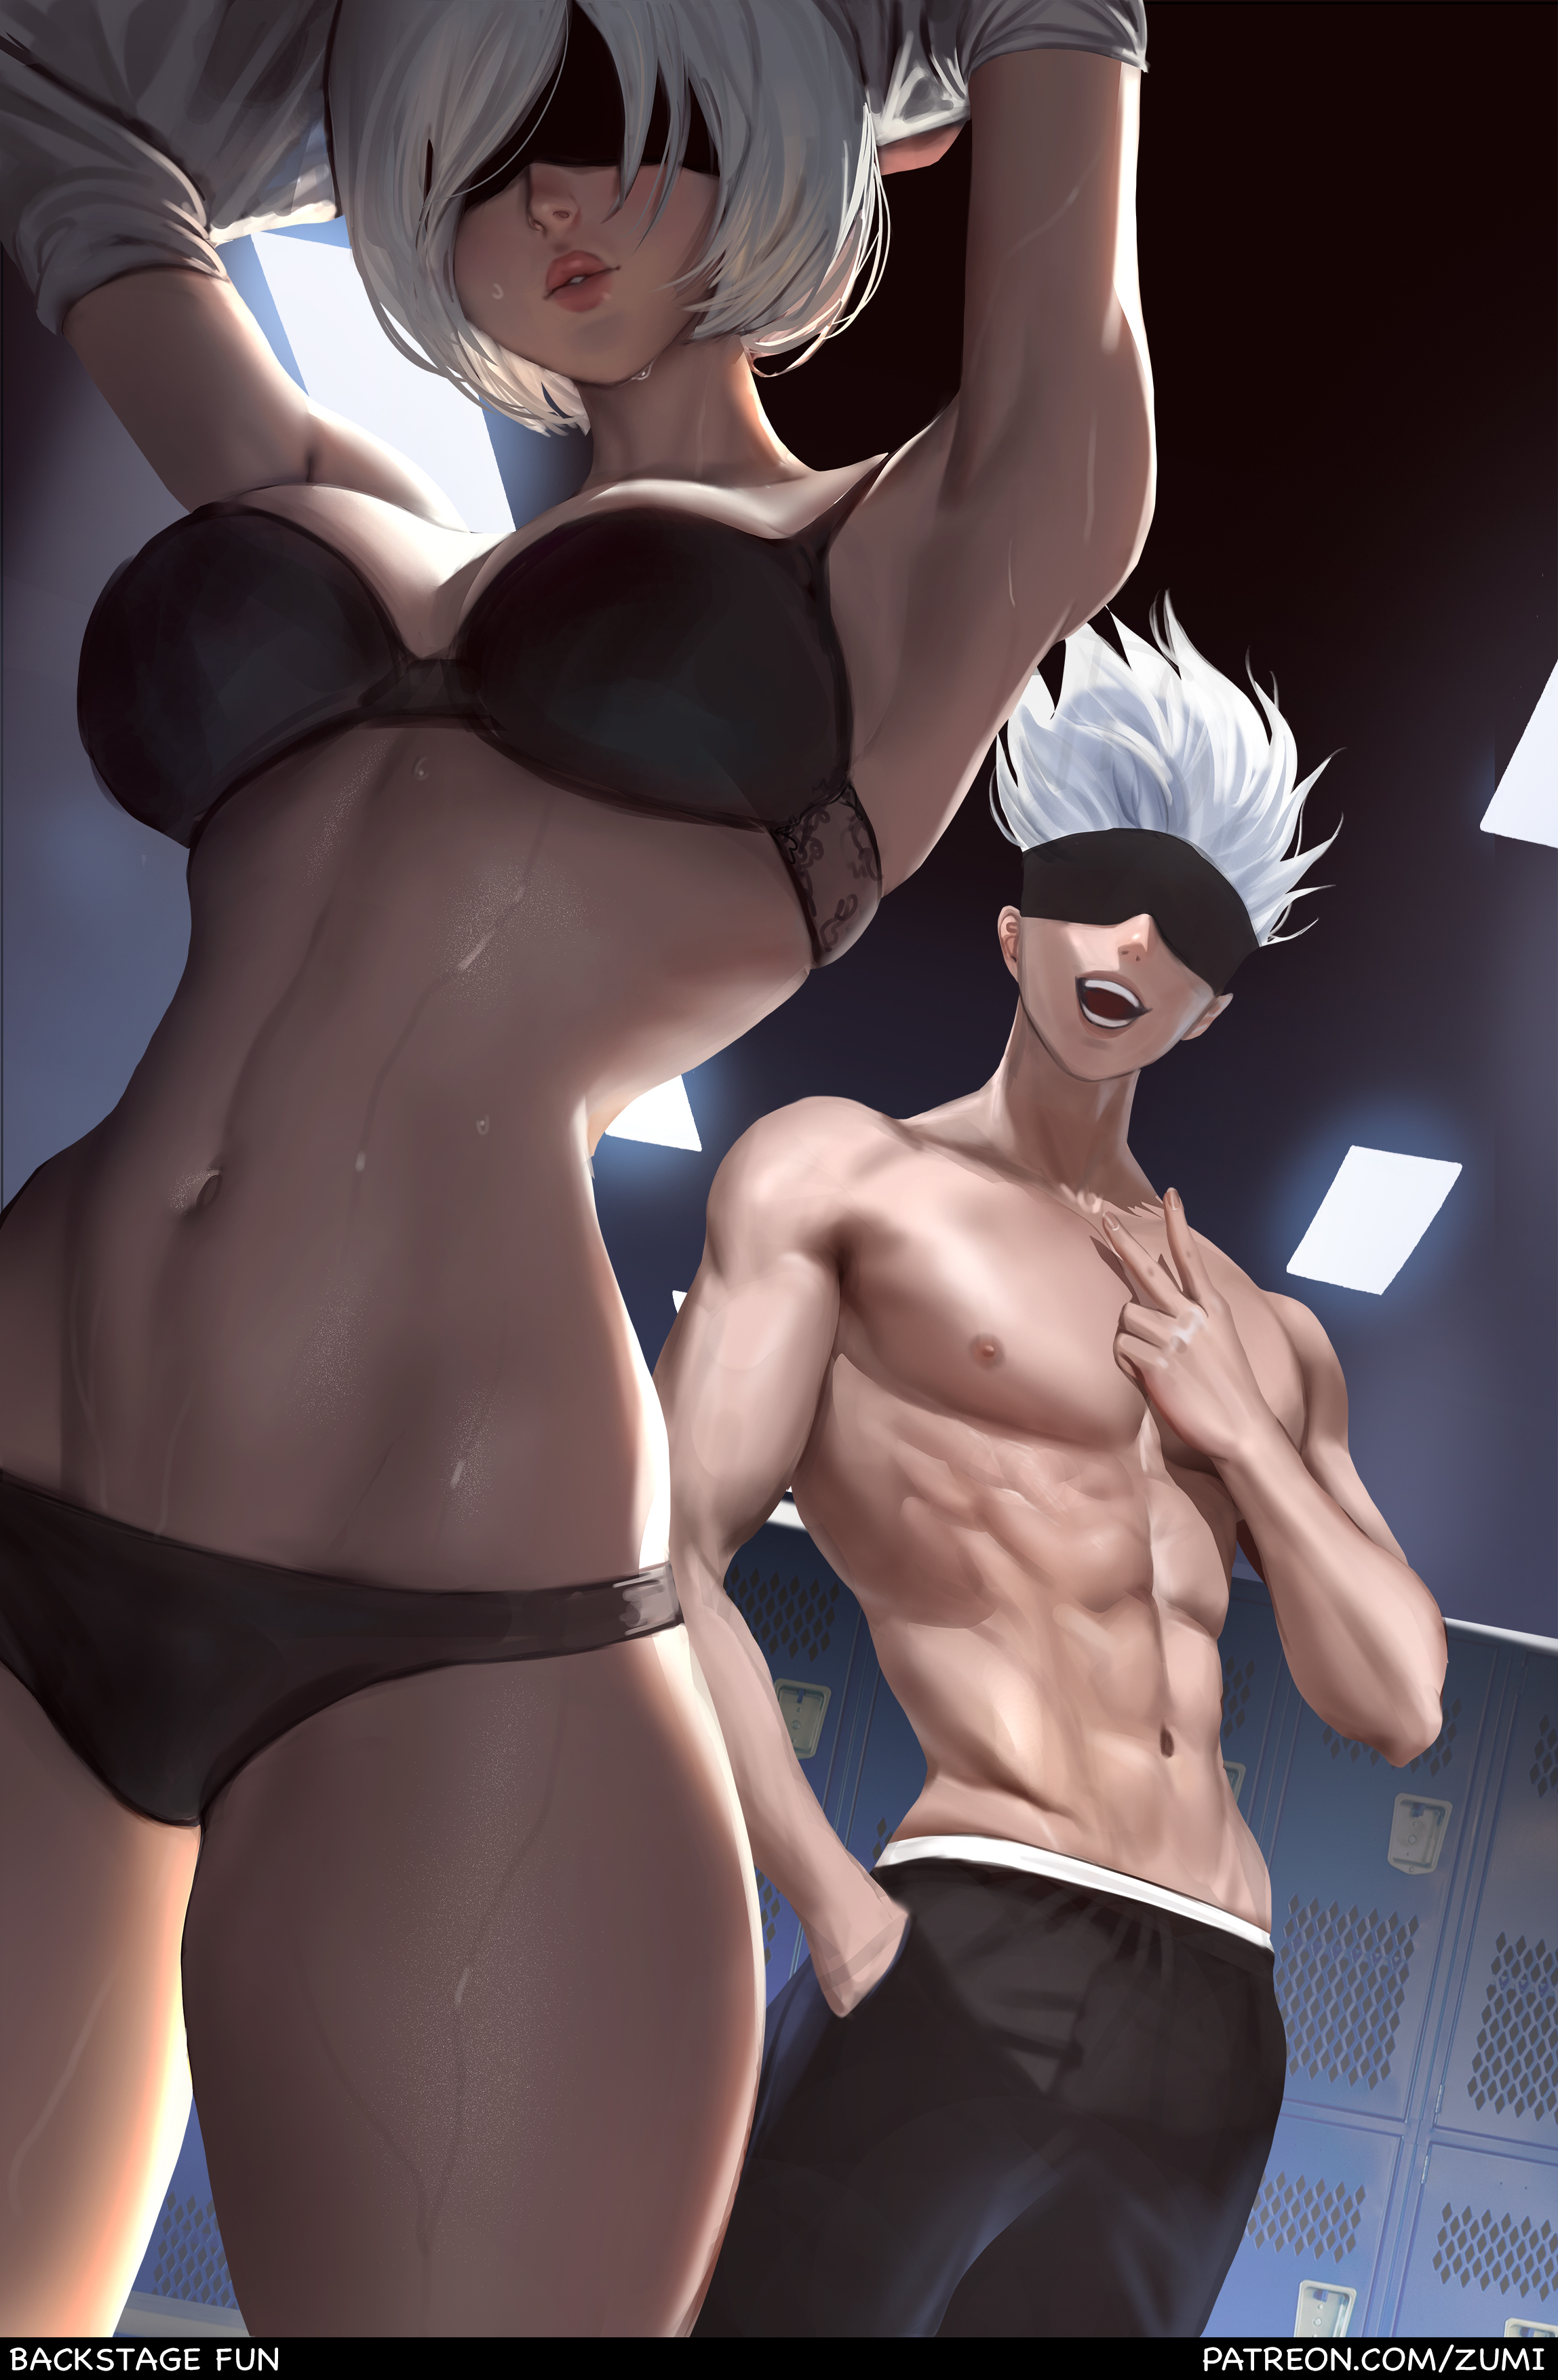 Anime 2297x3508 Satoru Gojo video games Jujutsu Kaisen anime anime boys locker room undressing sweat artwork drawing crossover fan art wet body blindfold standing muscles lockers short hair peace sign open mouth armpits sweaty body hands in pockets Zumi big boobs watermarked 2B (Nier: Automata) abs video game girls skinny underwear Nier: Automata portrait display ceiling ceiling lights white hair